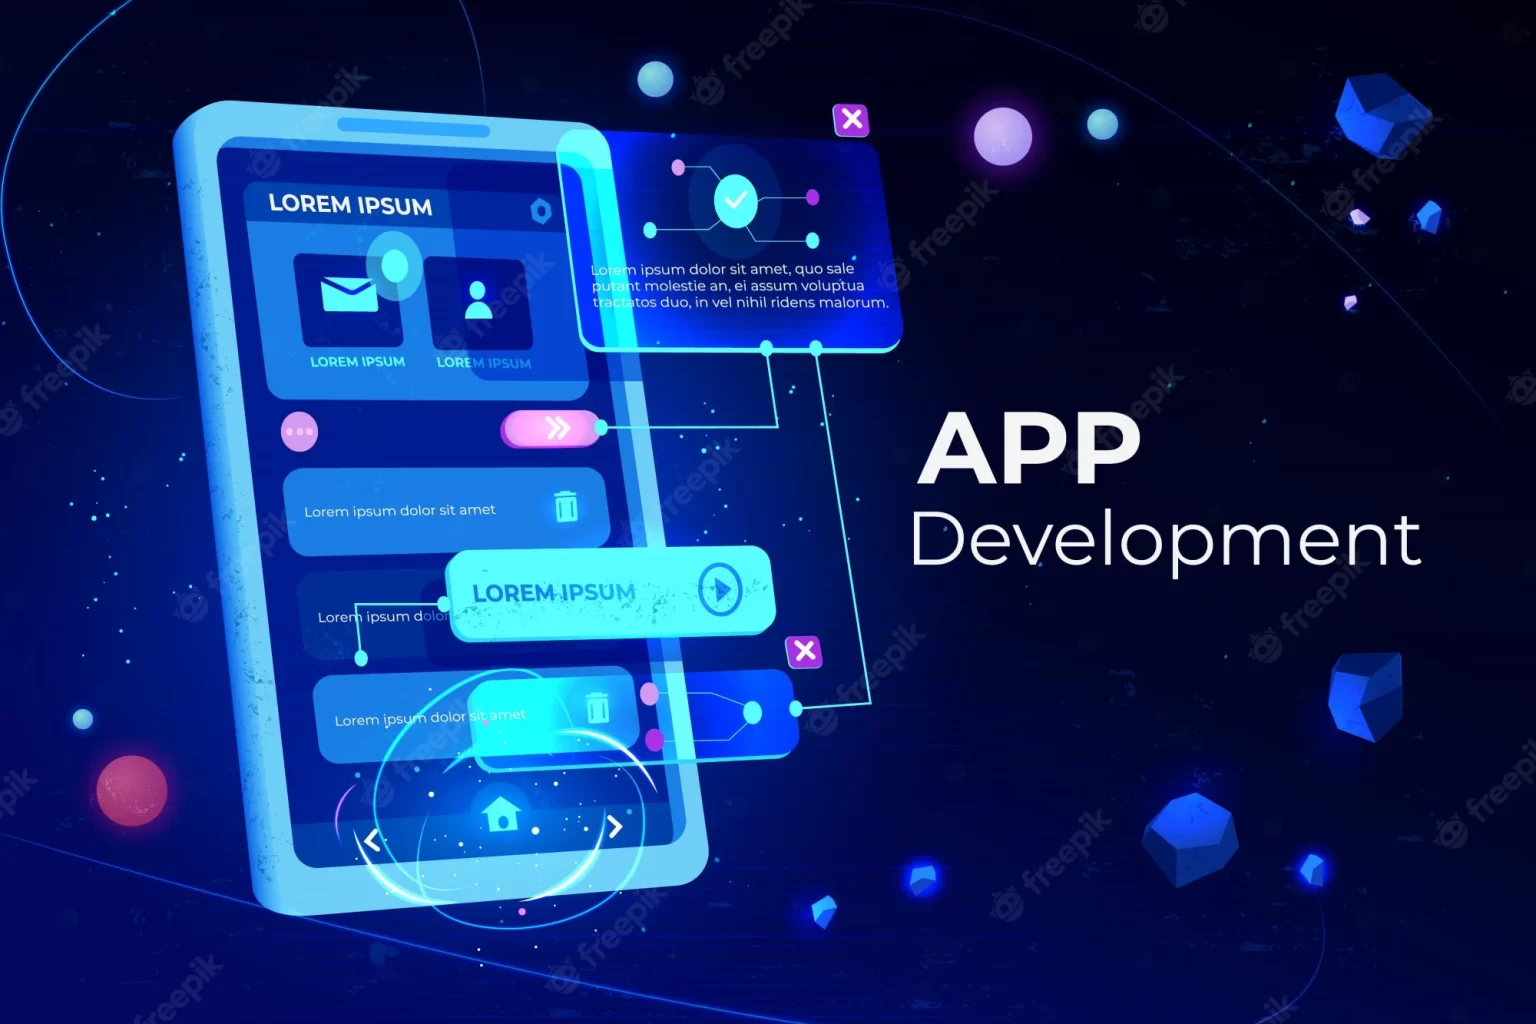 img freepik com app development banner 33099 1720 1536x1024 - How much does it cost to create an app in 2022?